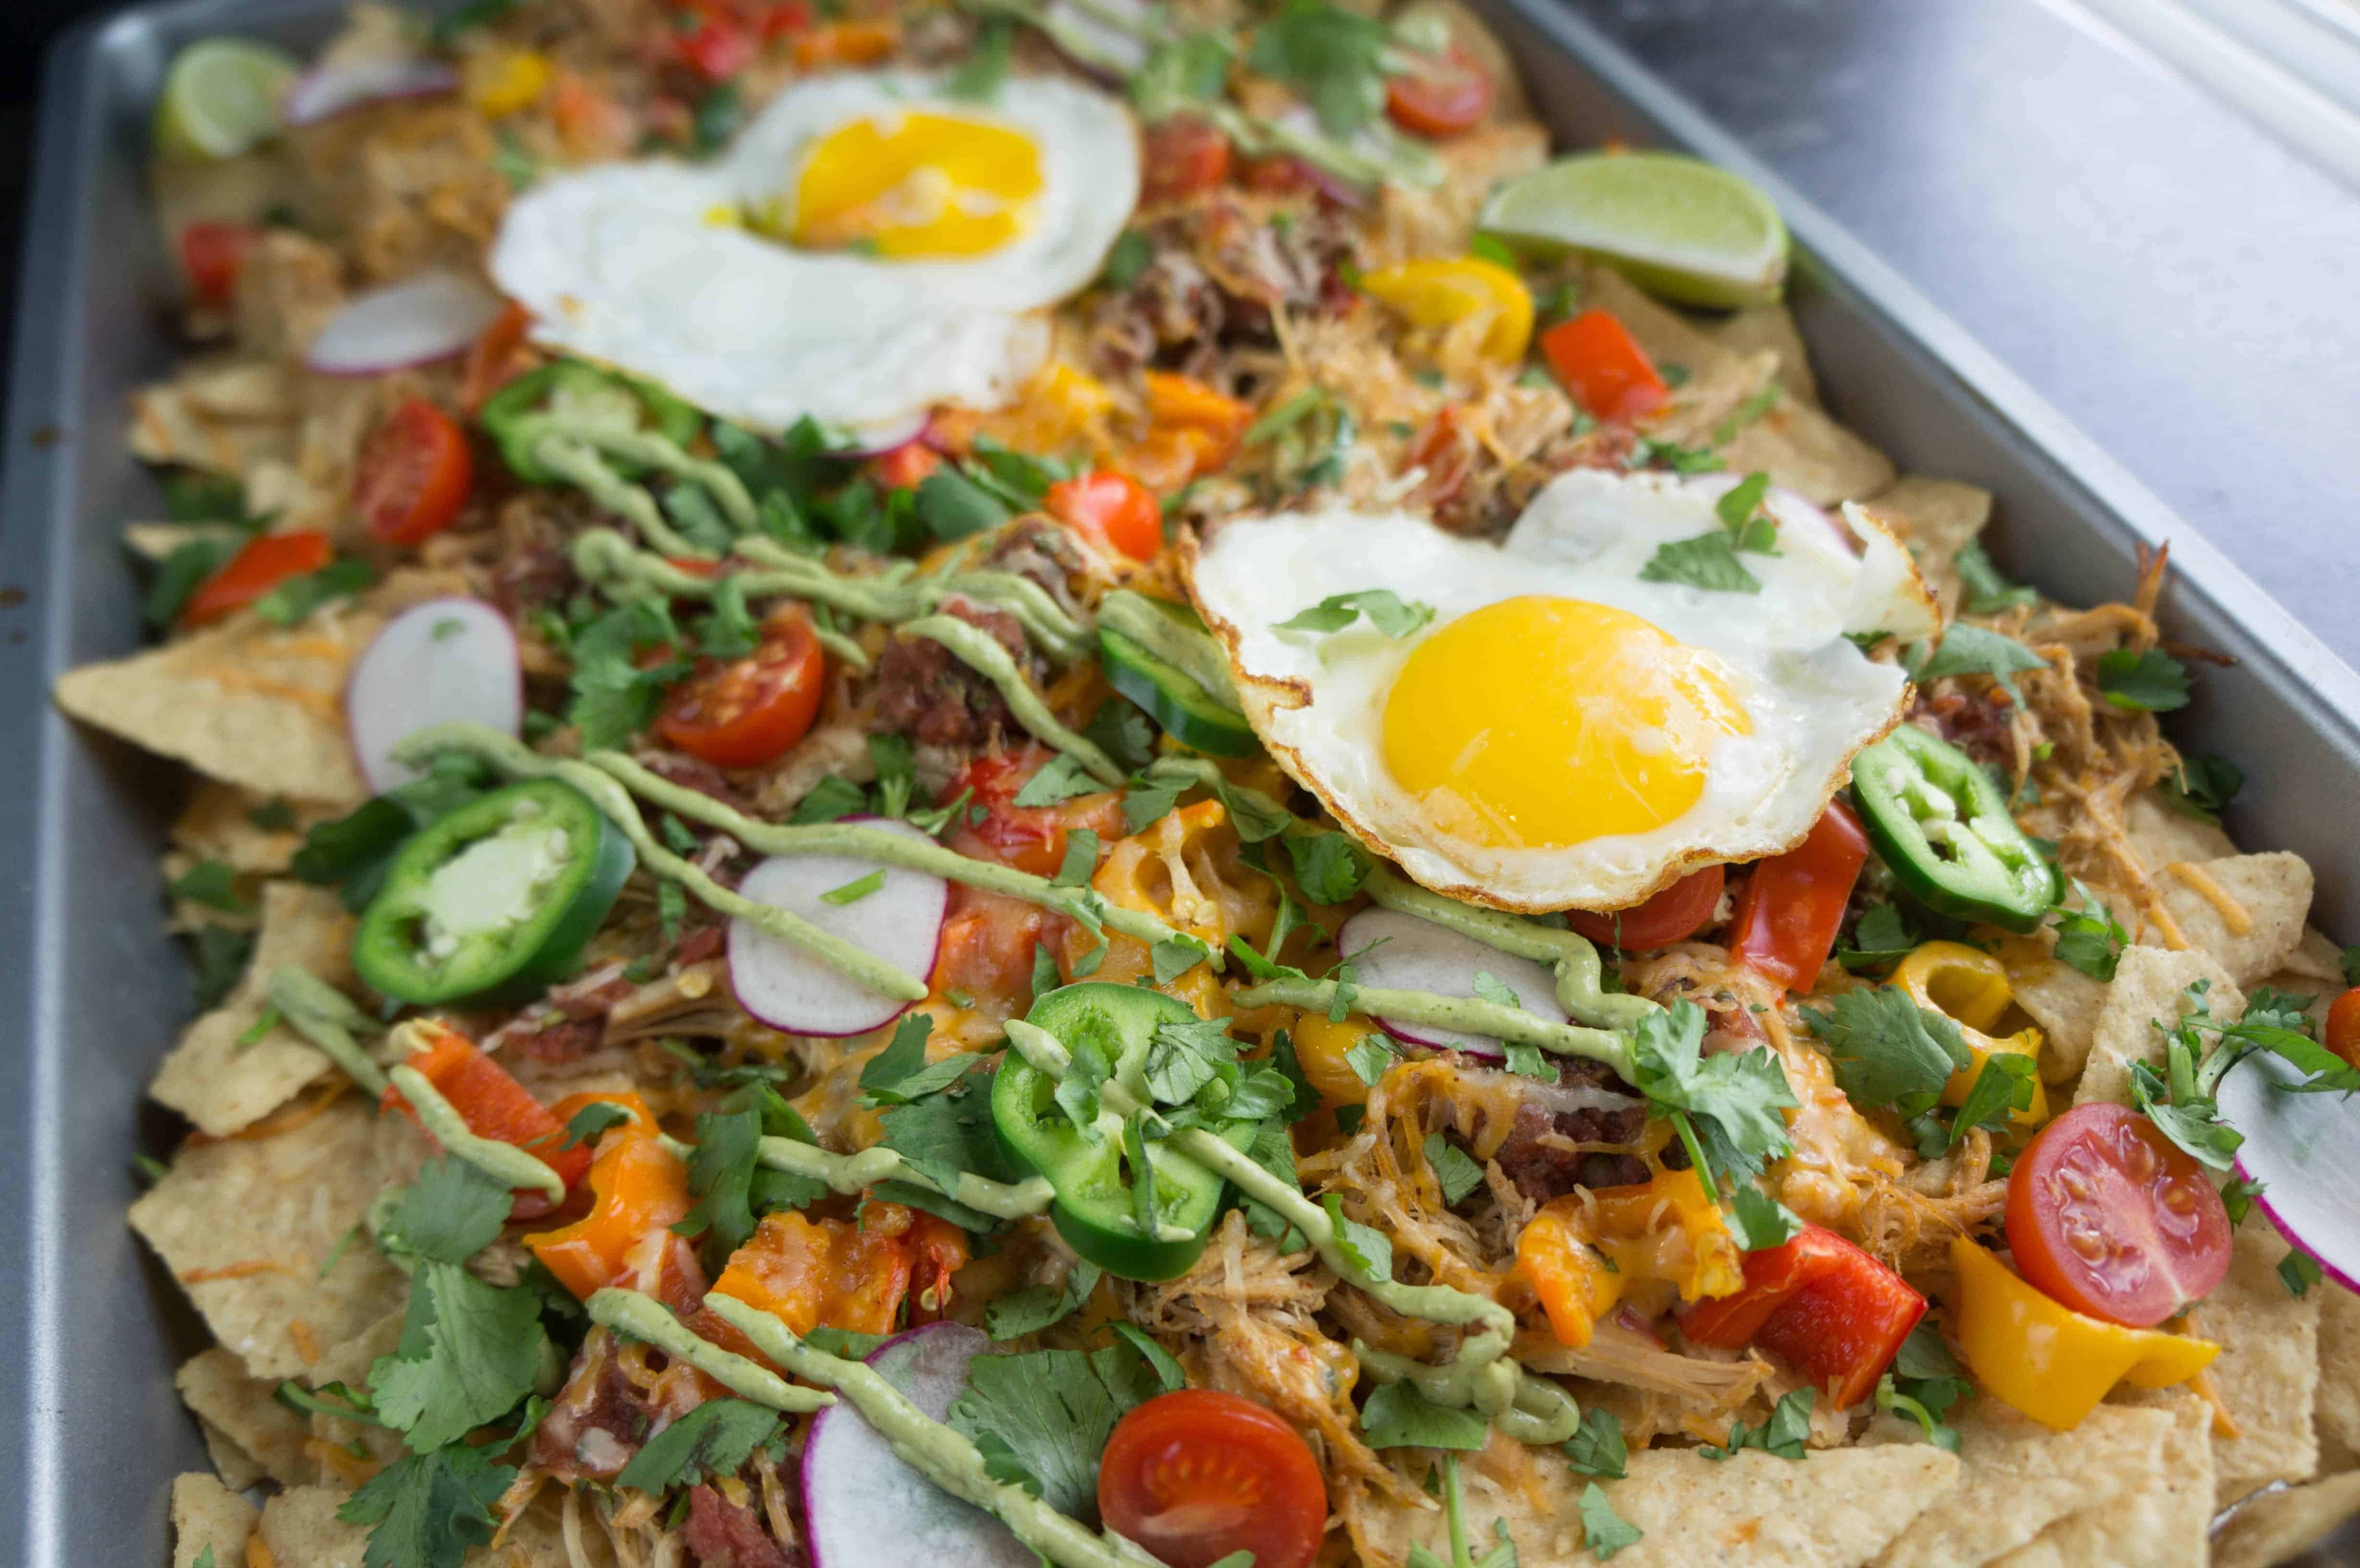 Game day snacks aren't complete without a big sheet pan of crispy cheesy goodness! Complete your tailgate menu with these pulled pork nachos. 